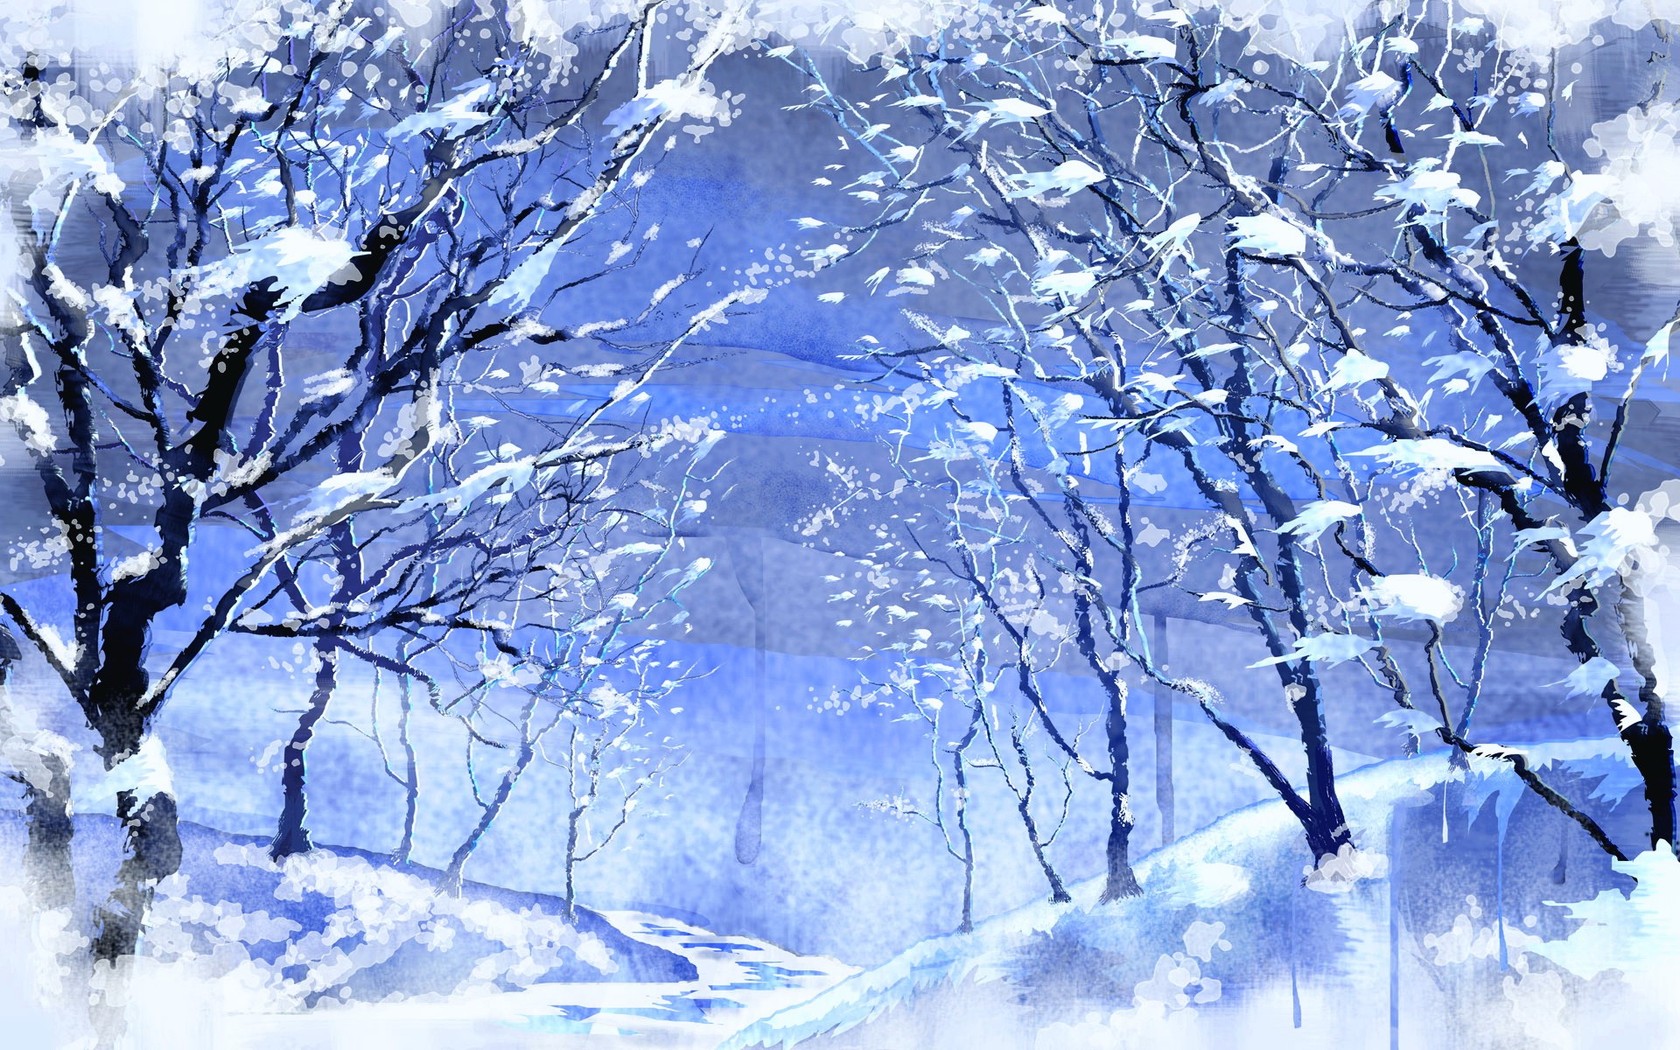 Anime Style Winter Background by wbd on DeviantArt